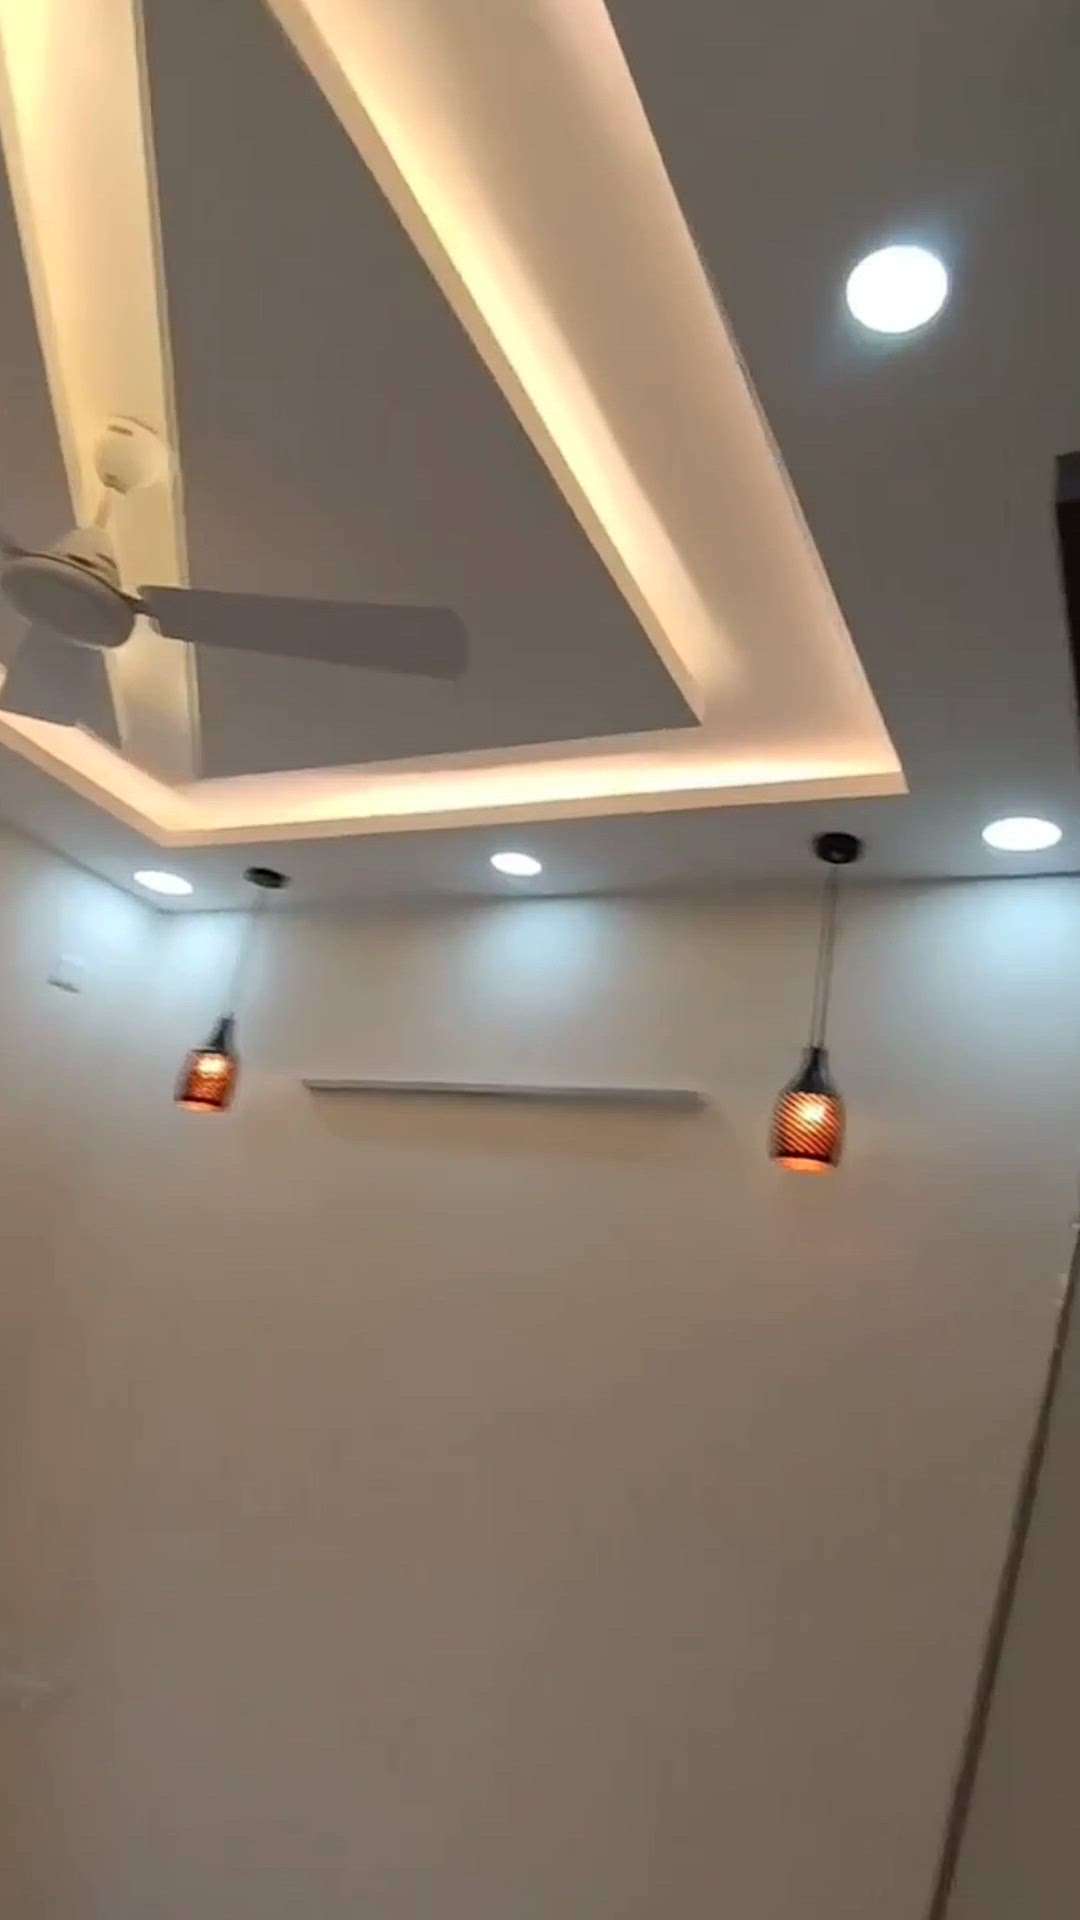 93  02 69 77 69
#FalseCeiling #popceiling #GypsumCeiling #selling #bhopal  #bhopalpop #bedroomselling